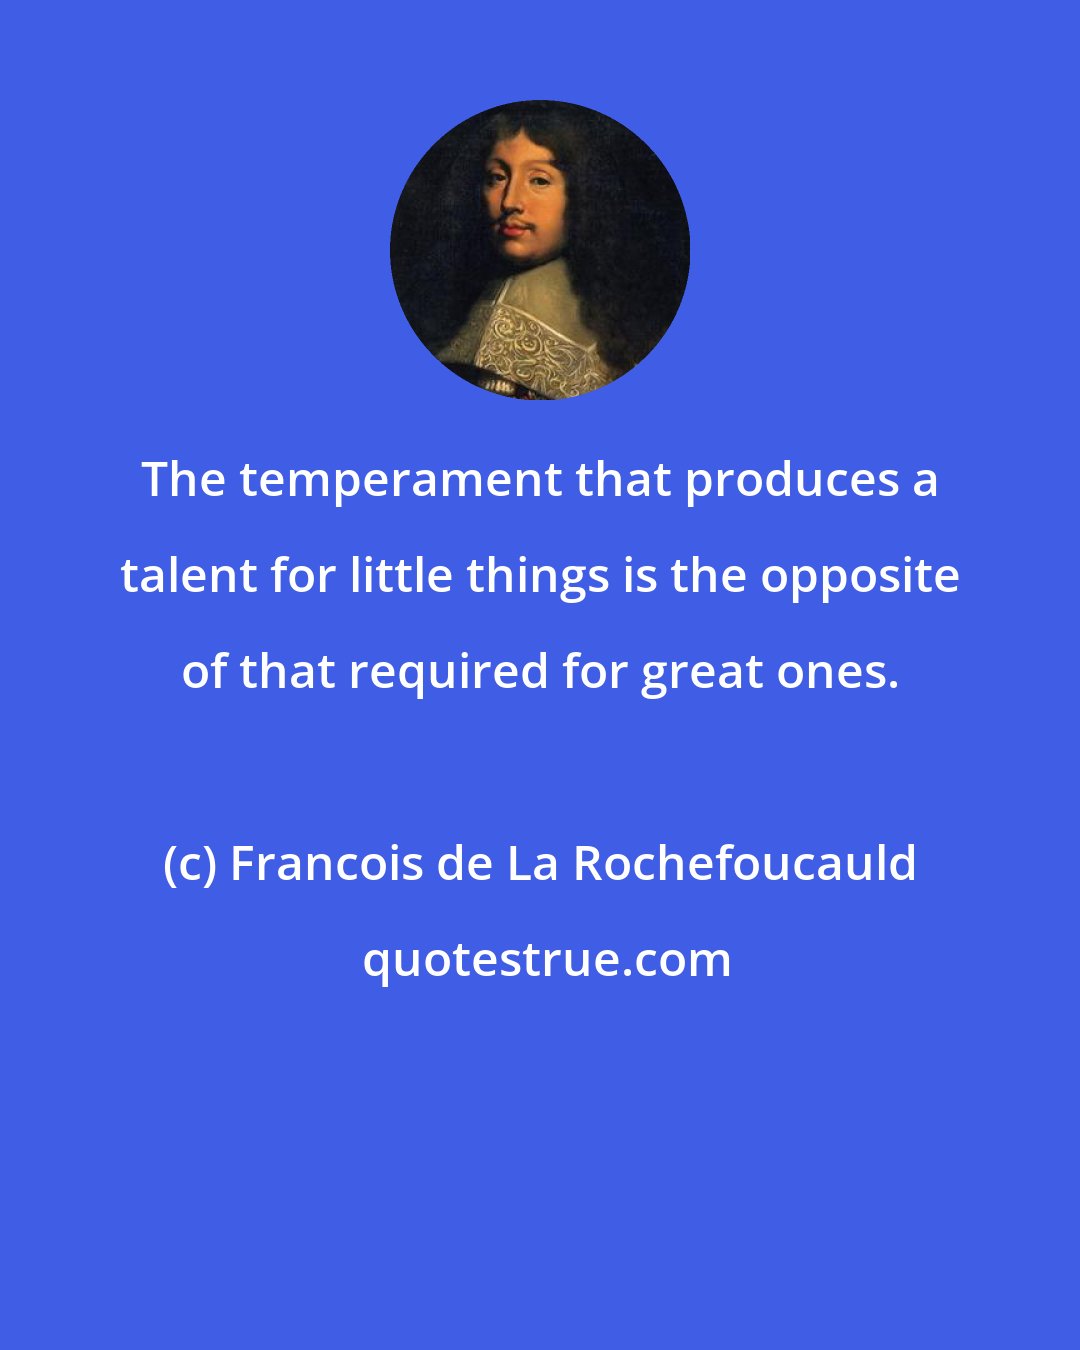 Francois de La Rochefoucauld: The temperament that produces a talent for little things is the opposite of that required for great ones.